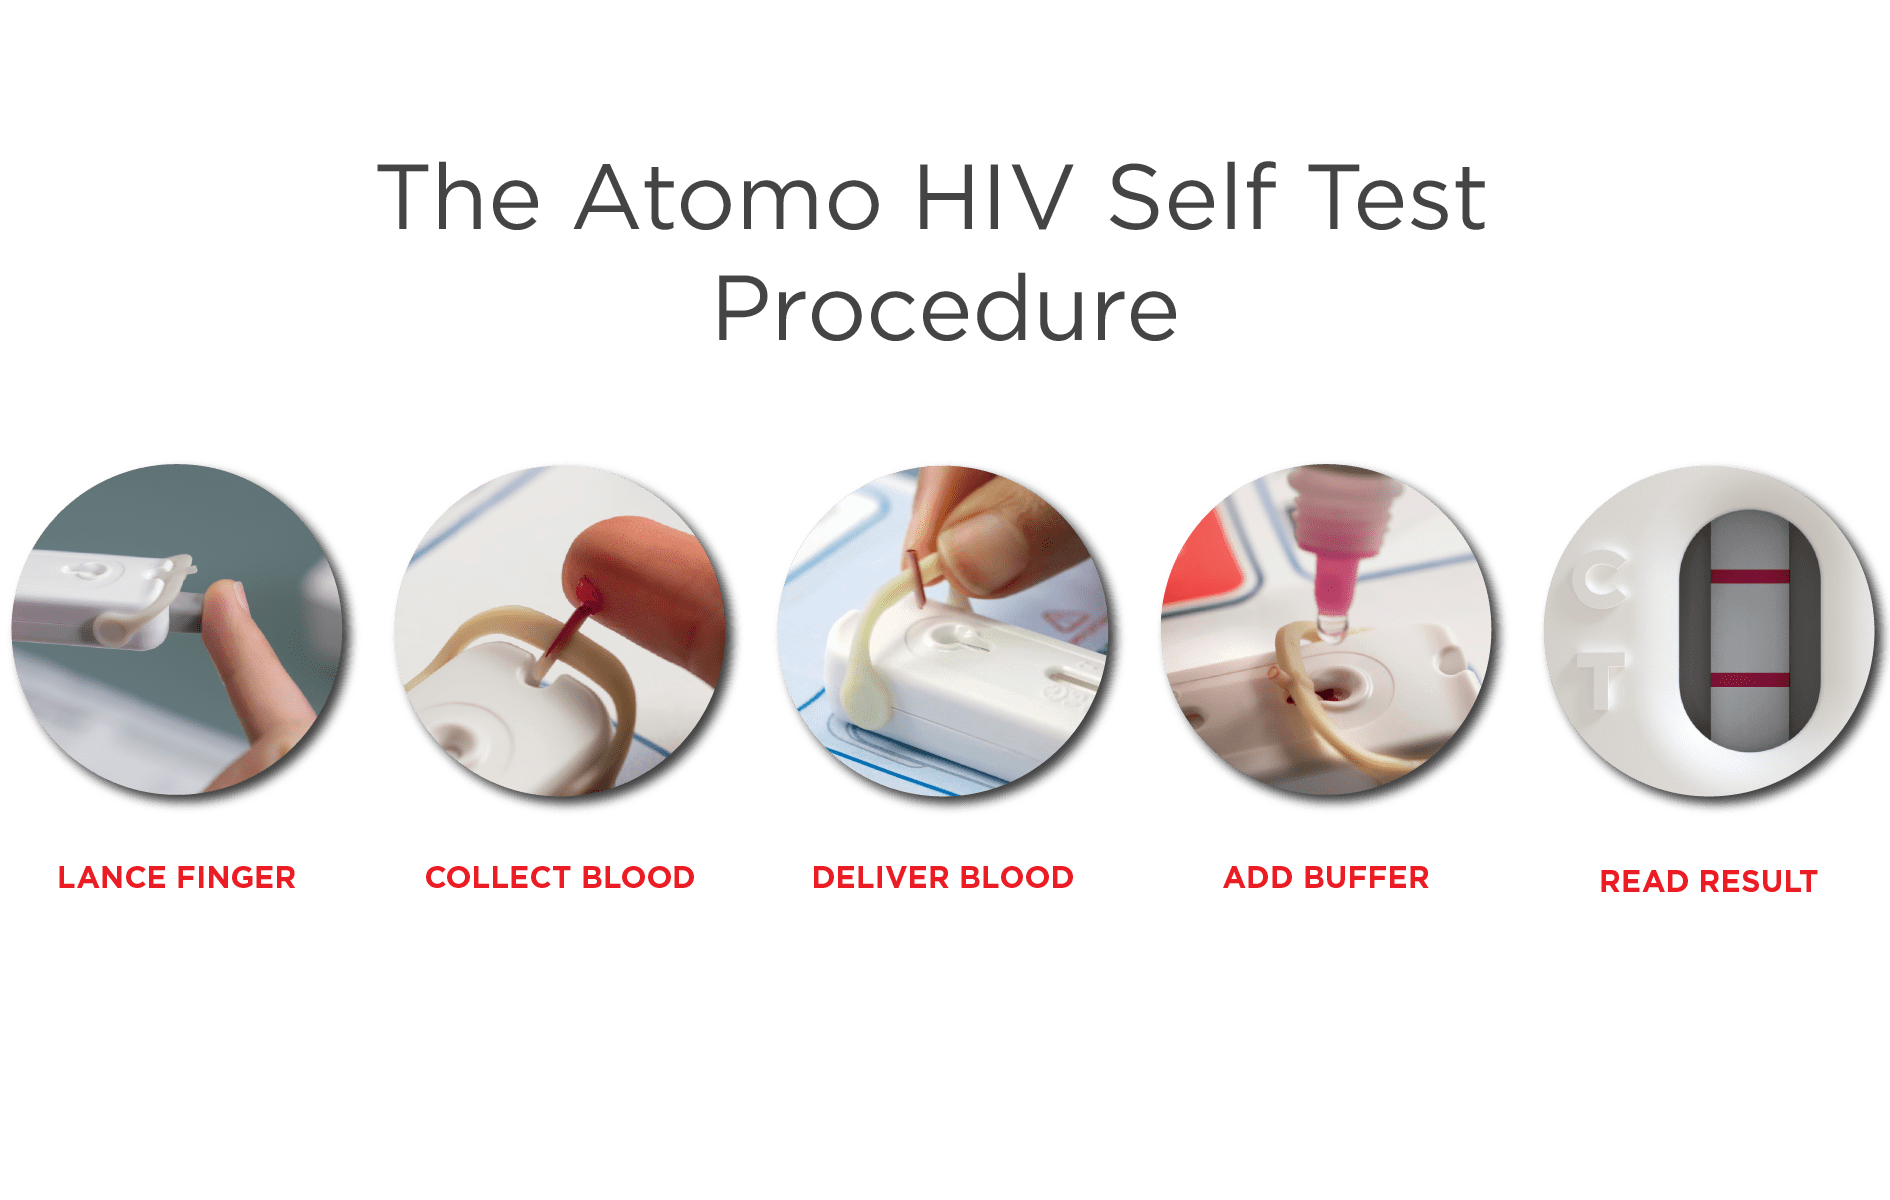 Step-by-step guide on how to perform an Atomo HIV self-test for quick results